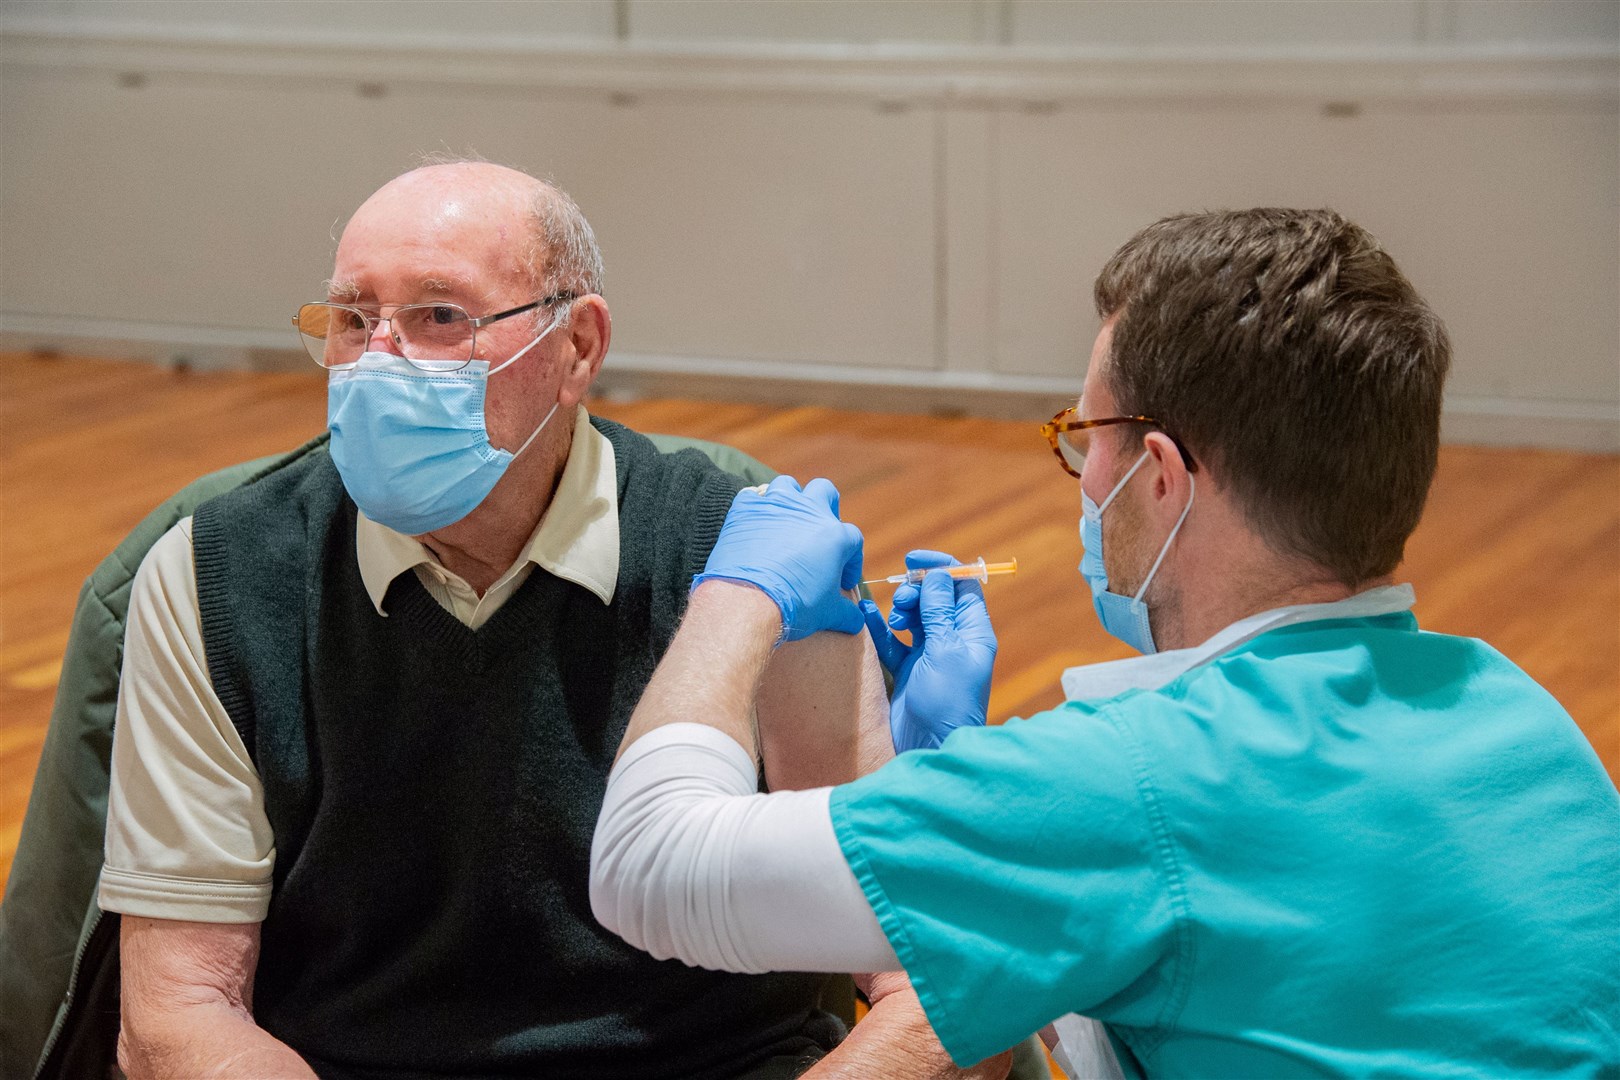 Advanced Nurse Practitioner Grant Redford gives Ian Shepherd the vaccine at the Fochabers Public Institut. Picture: Daniel Forsyth